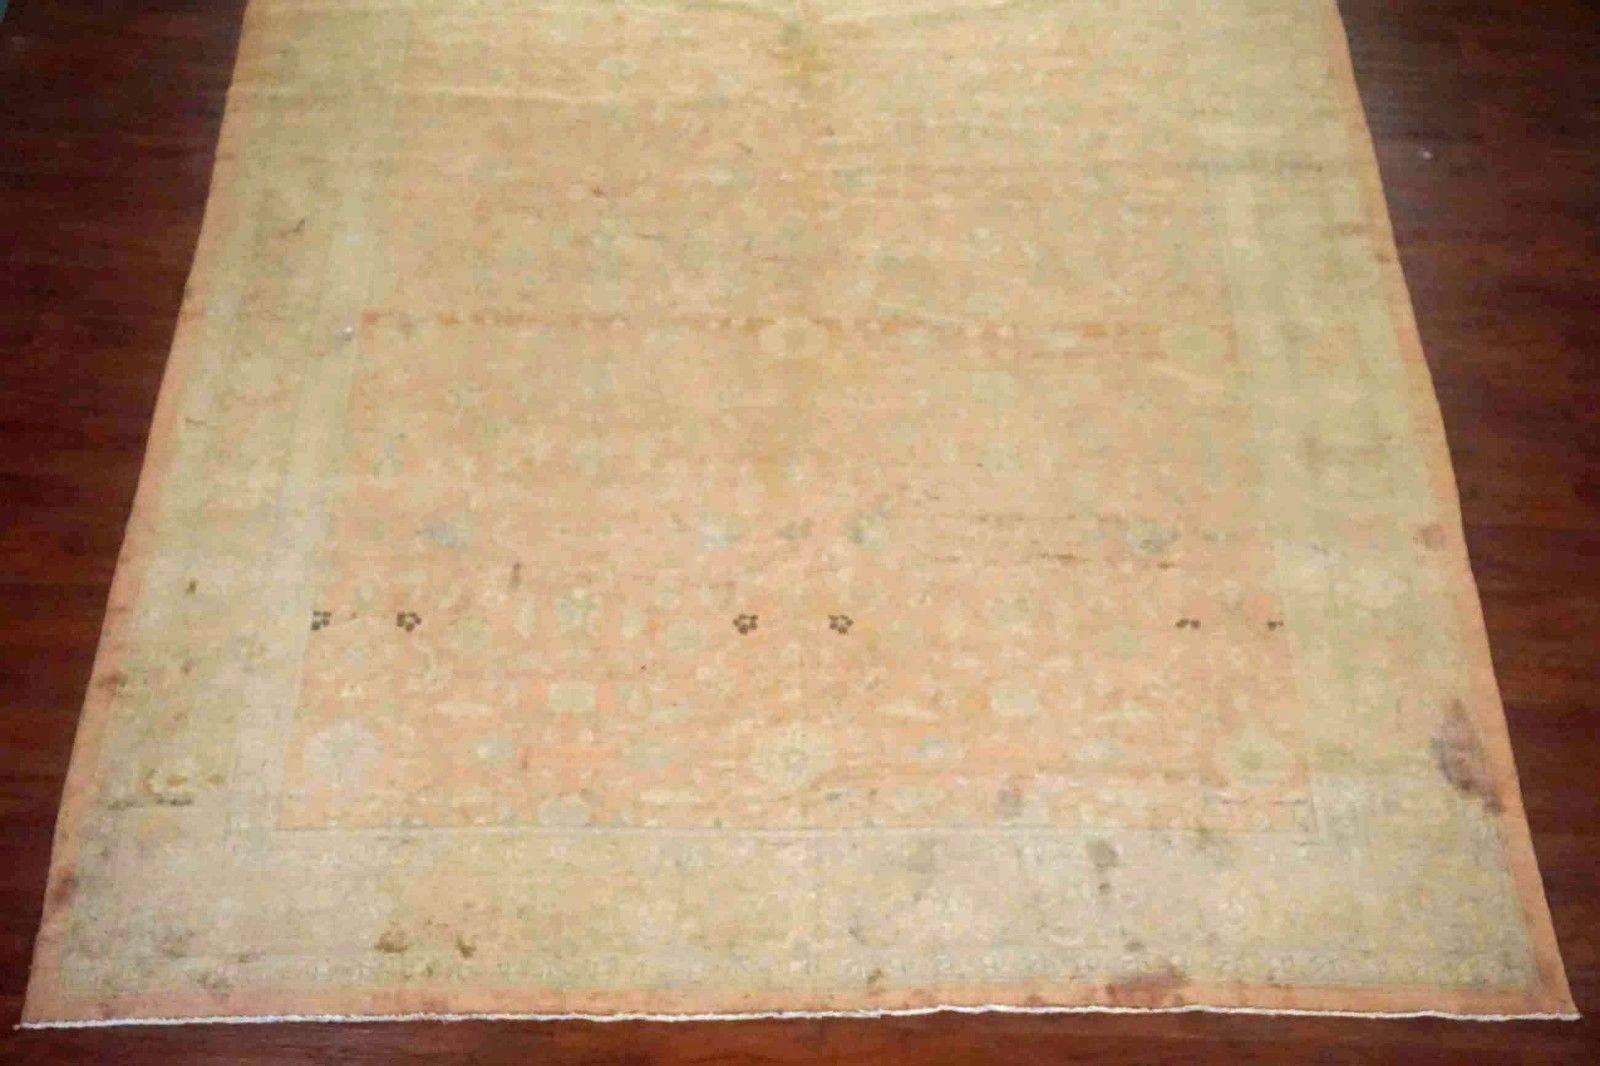 Dusty-rose antique Indian rug, 

circa 1900

Measures: 9' 11